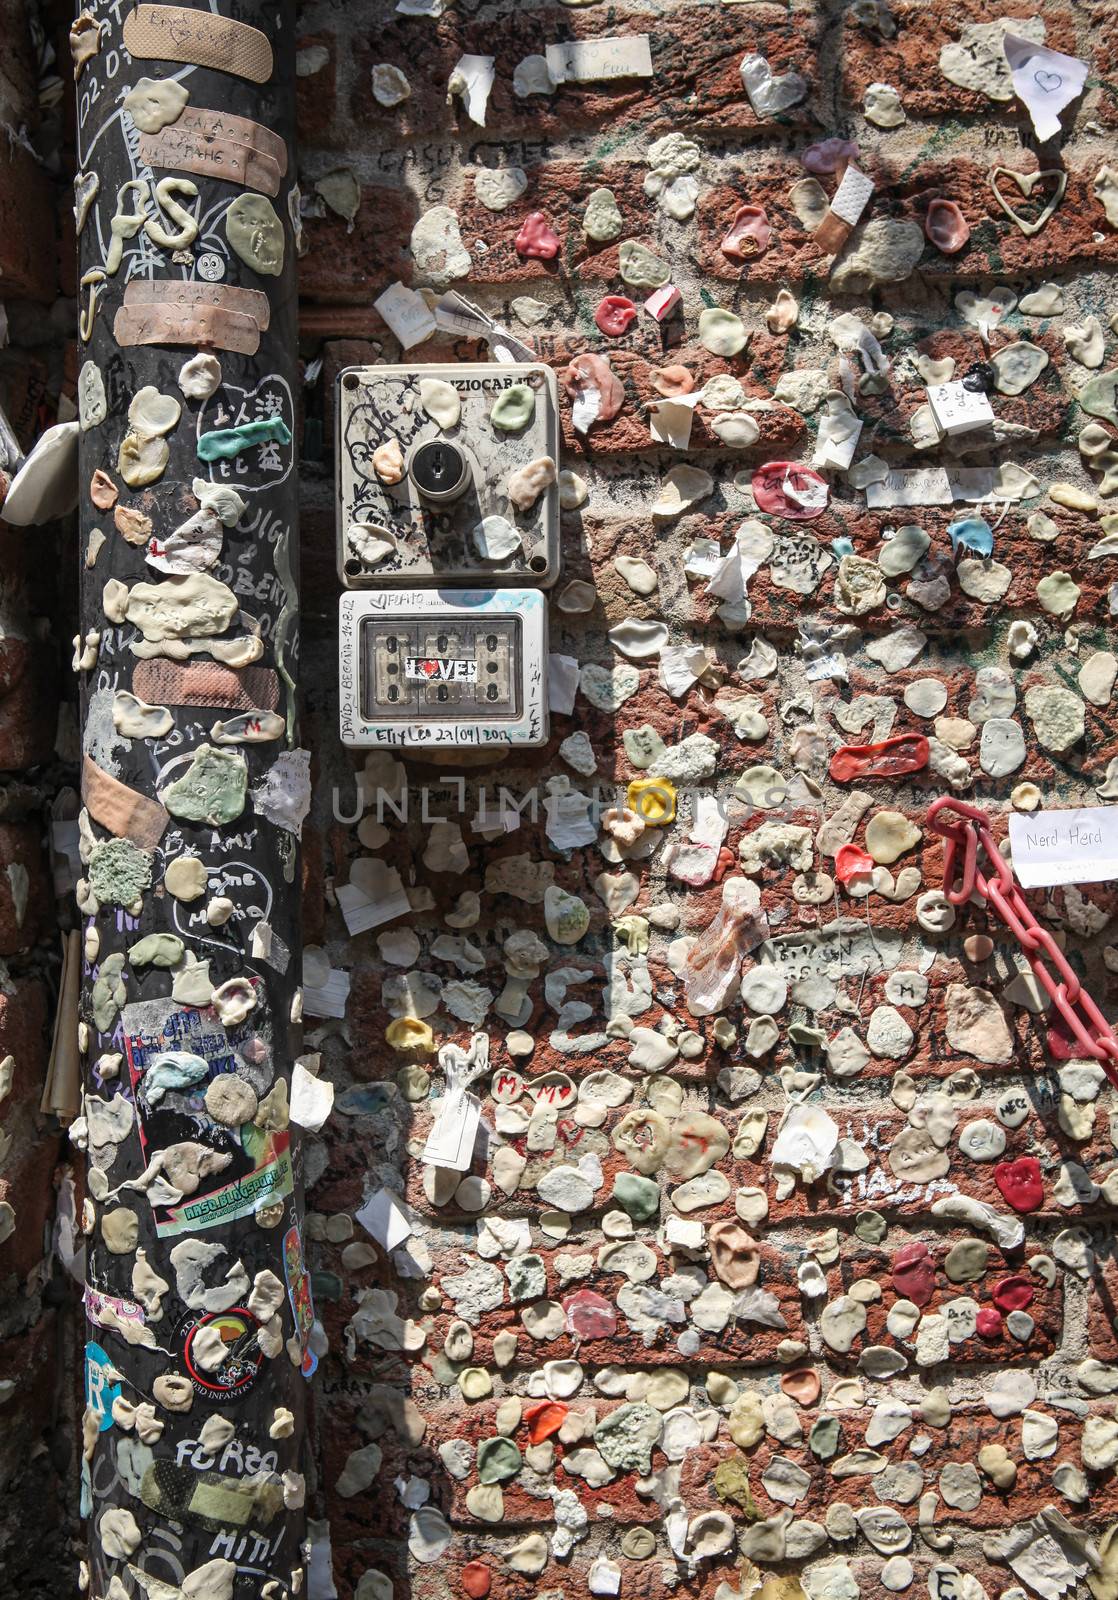 Verona, Italy – July 18, 2013: Colorful bubble gums with remnants of love notes stuck to the ancient brick wall and adjoining gutter in the courtyard of Juliet's House tourist attraction in Verona, Italy.